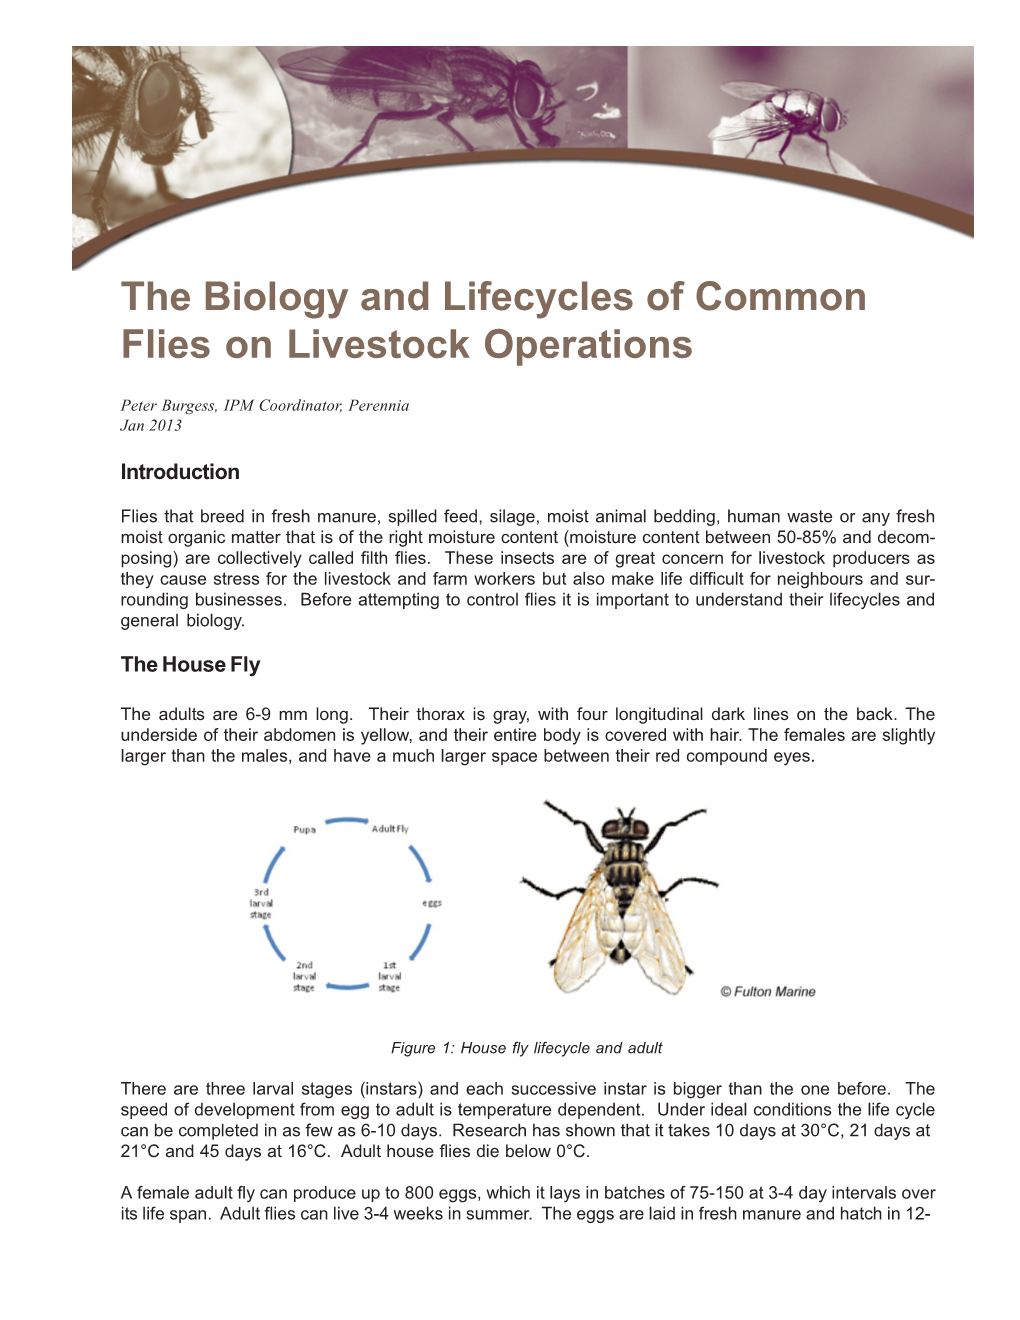 The Biology and Lifecycles of Common Flies in Livestock Operations